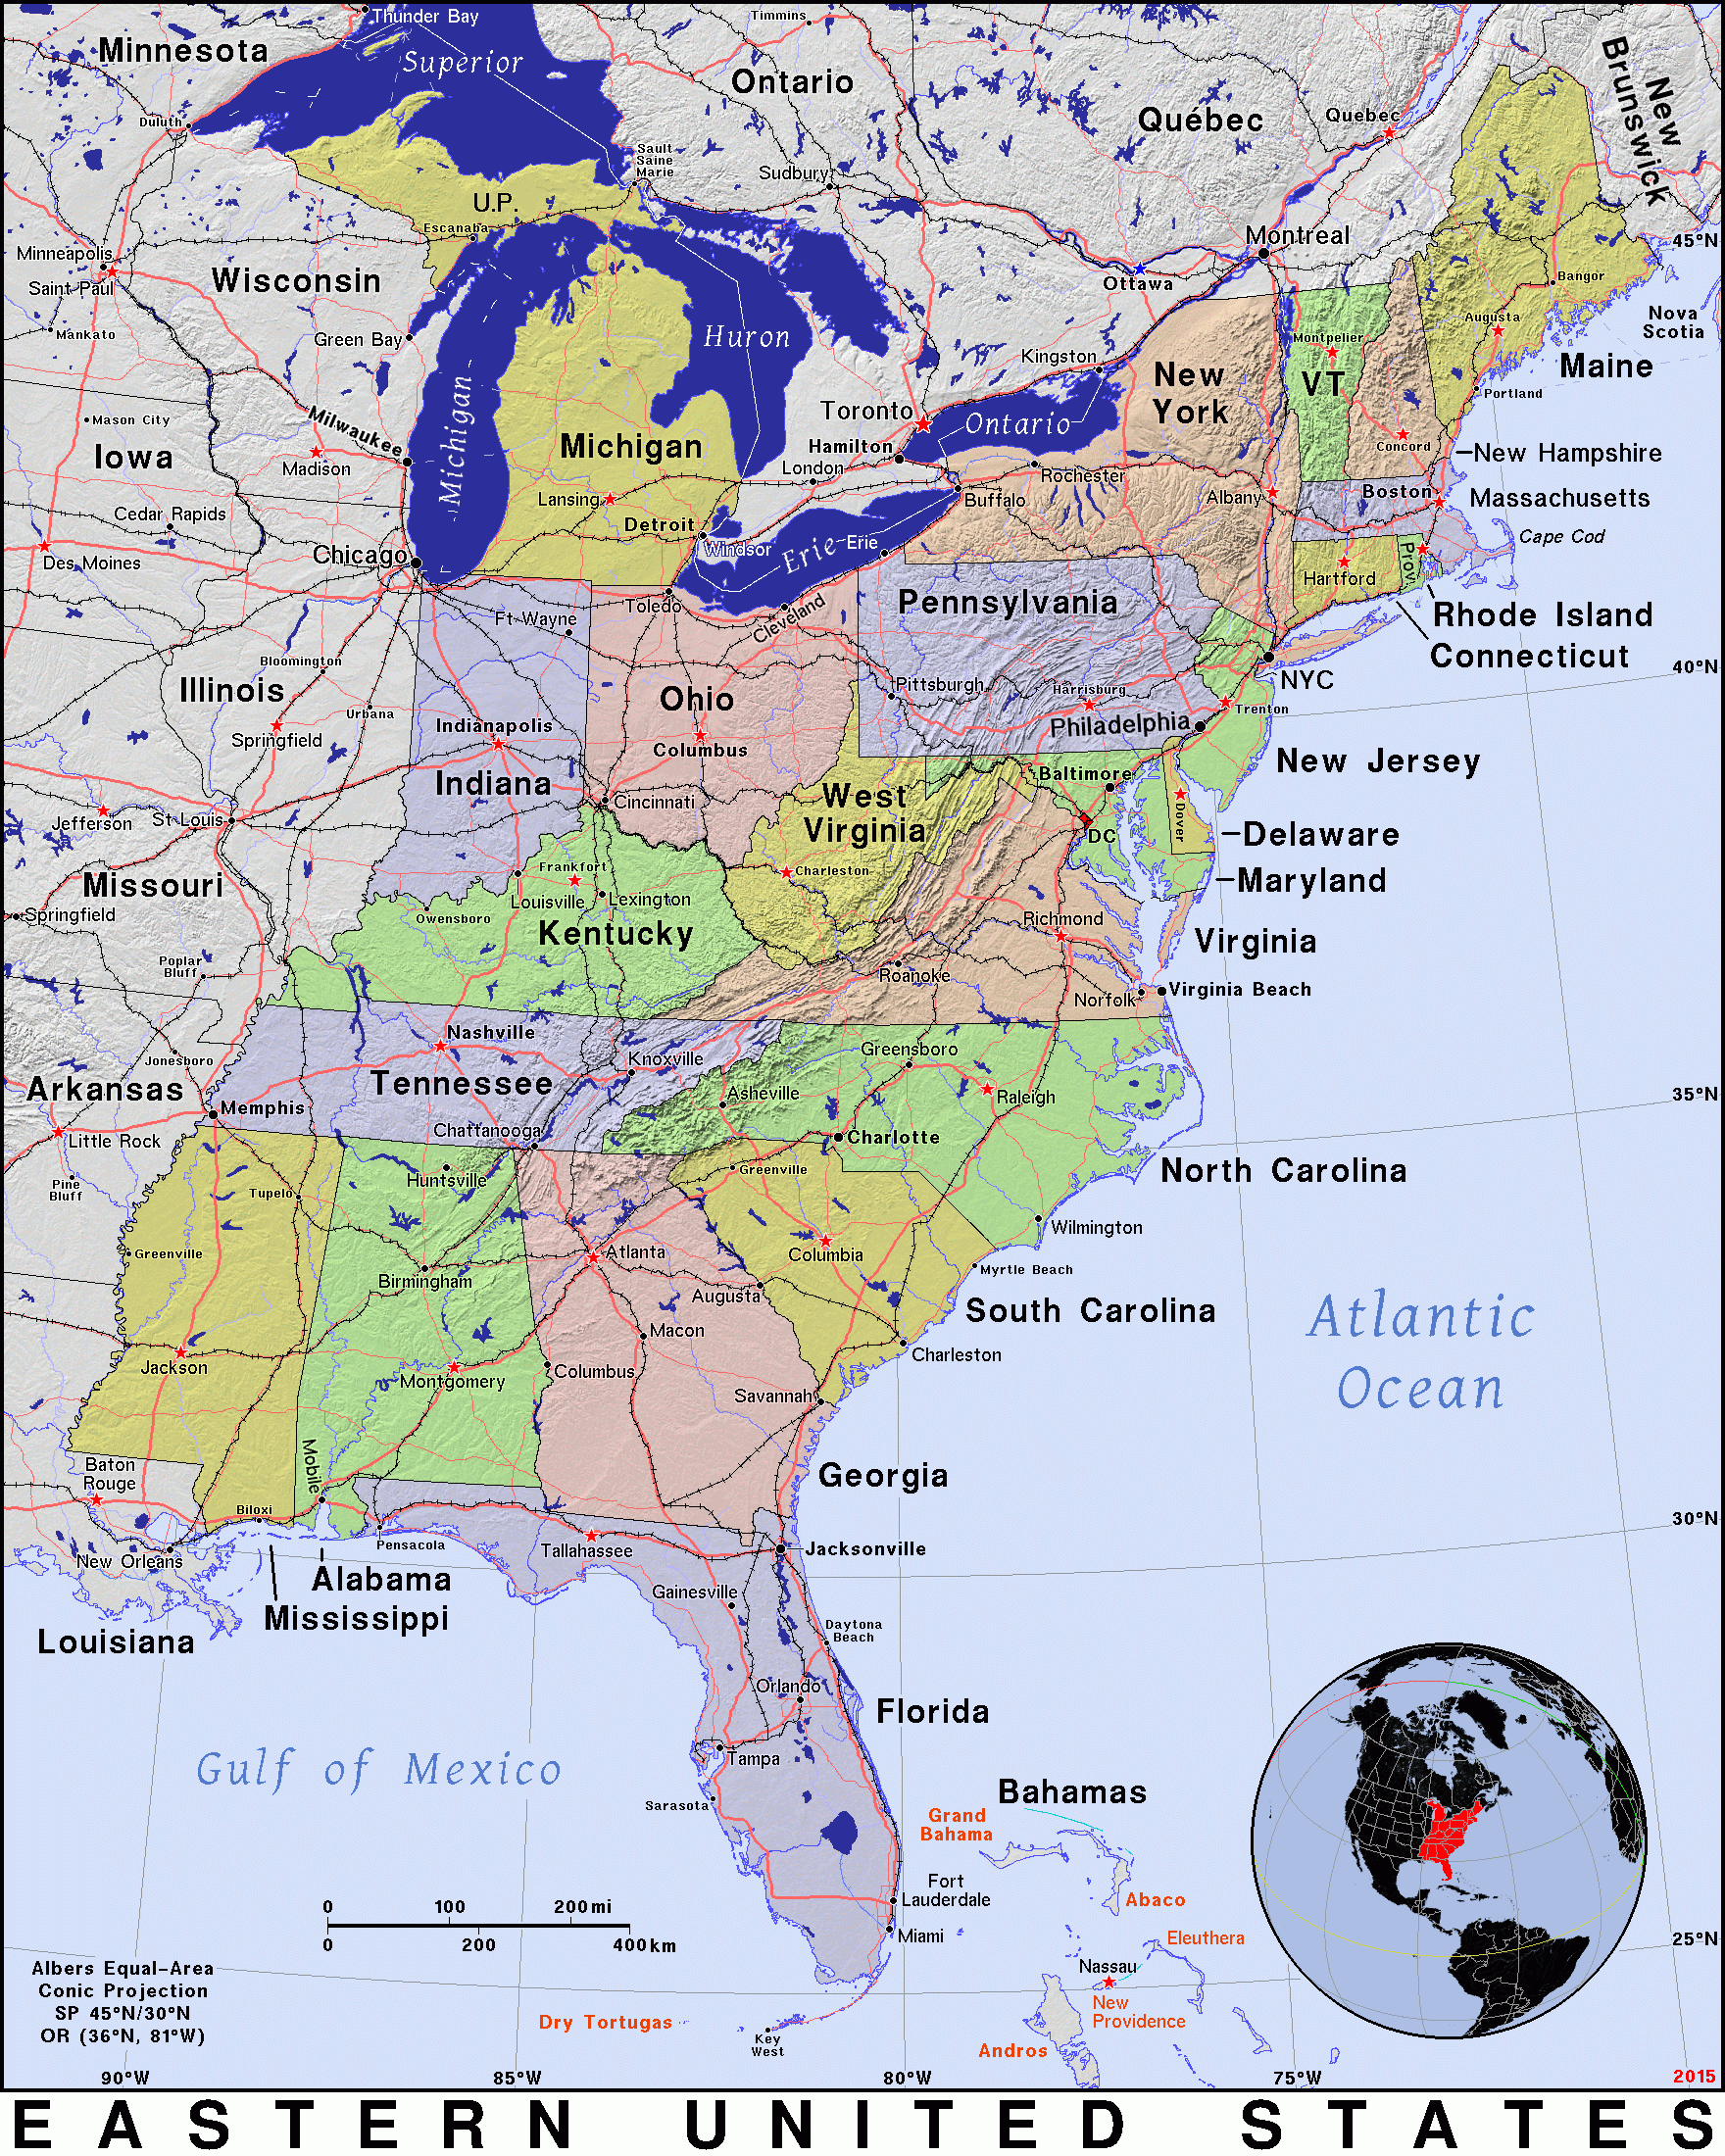 Eastern United States Public Domain Maps By PAT The Free Open 